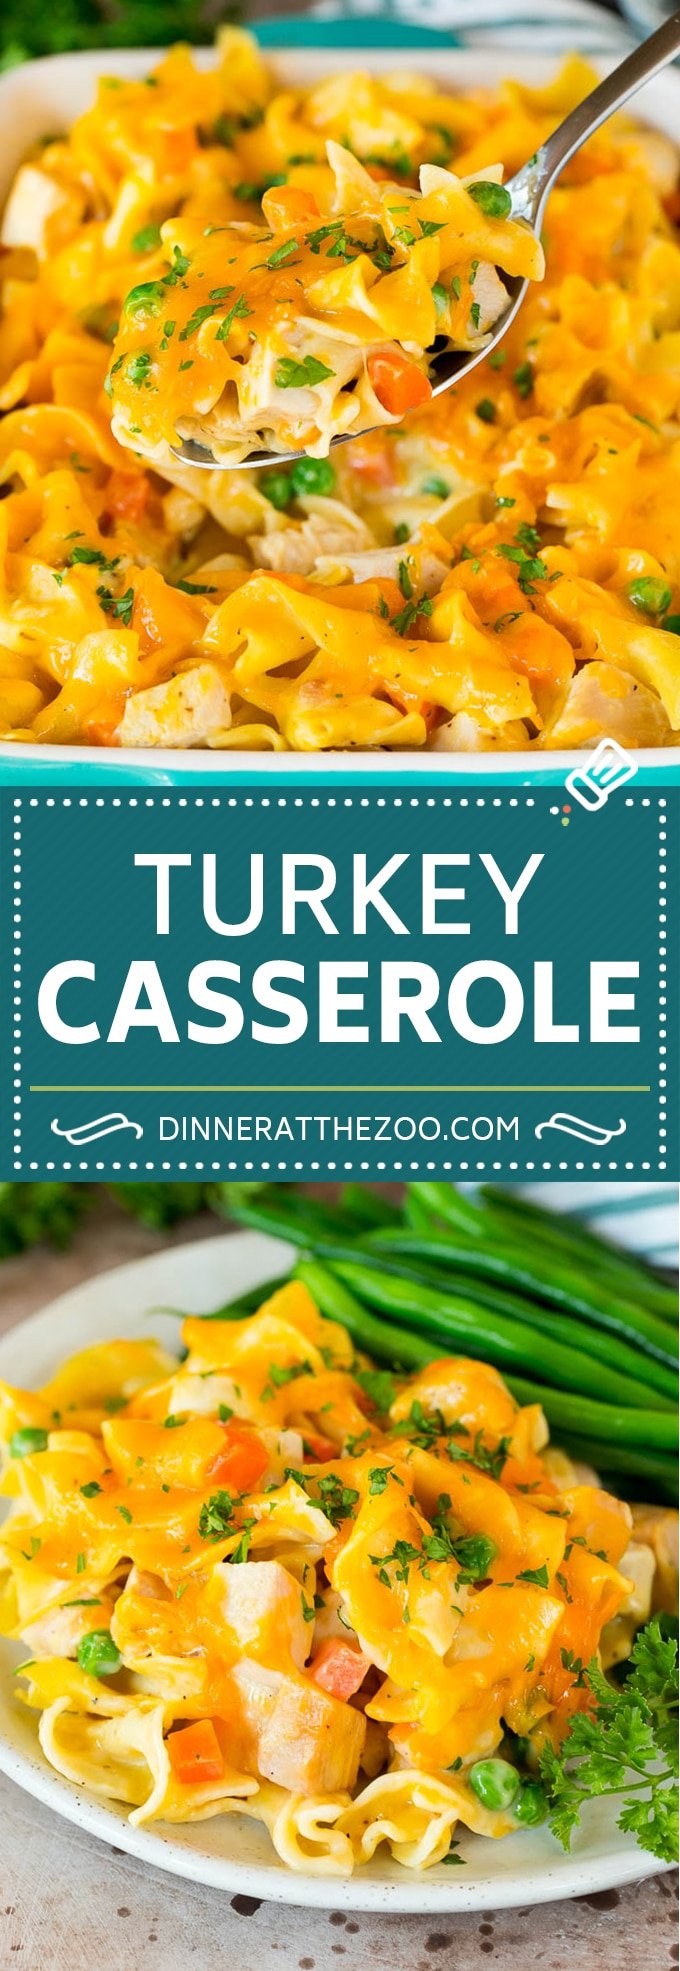 This turkey casserole is made with diced leftover turkey, egg noodles and vegetables, all tossed in a creamy cheesy sauce.